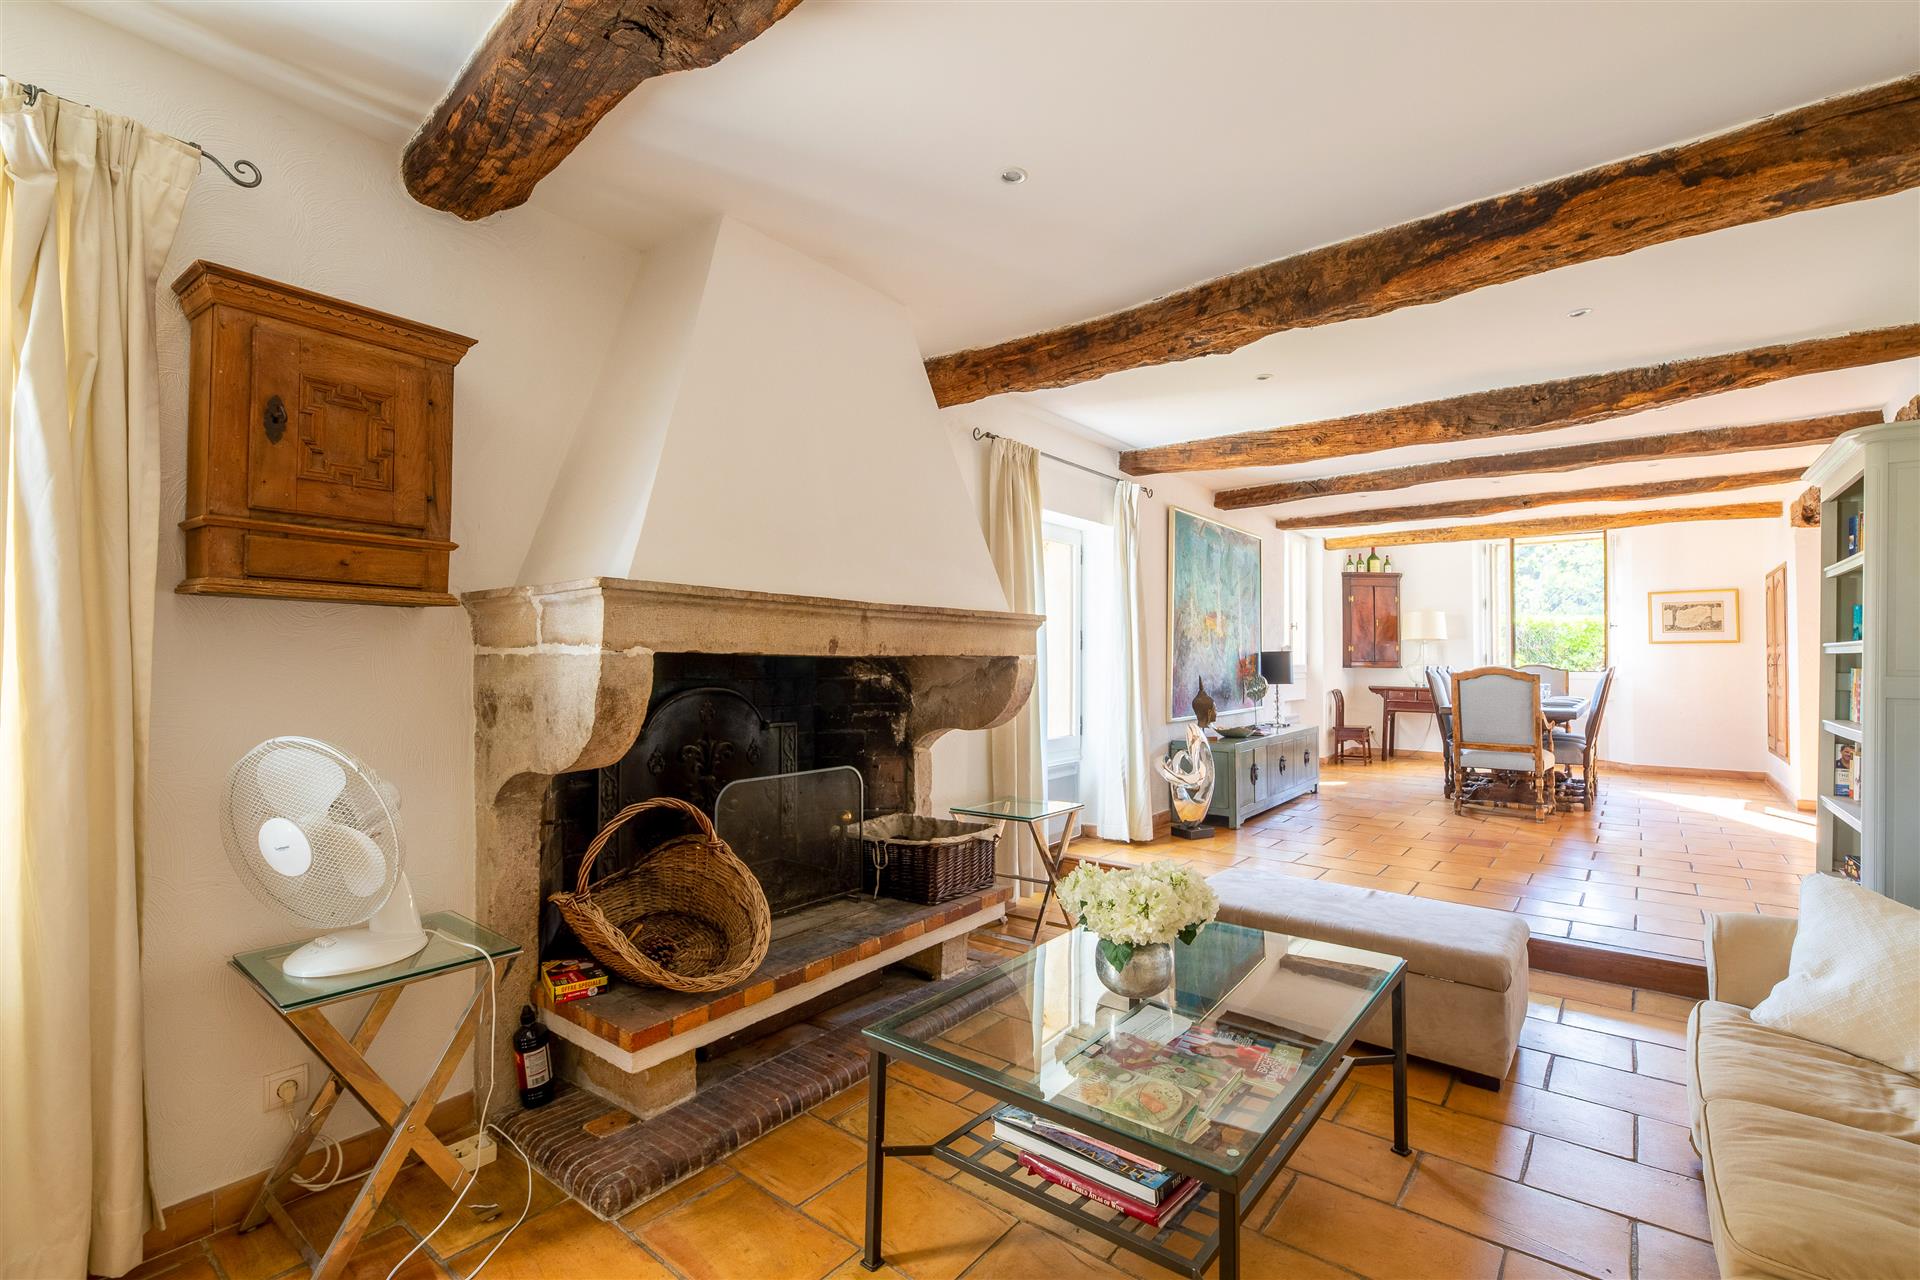 A beautiful stone bastide with swimming pool, situated in a quaint hamlet in Montauroux